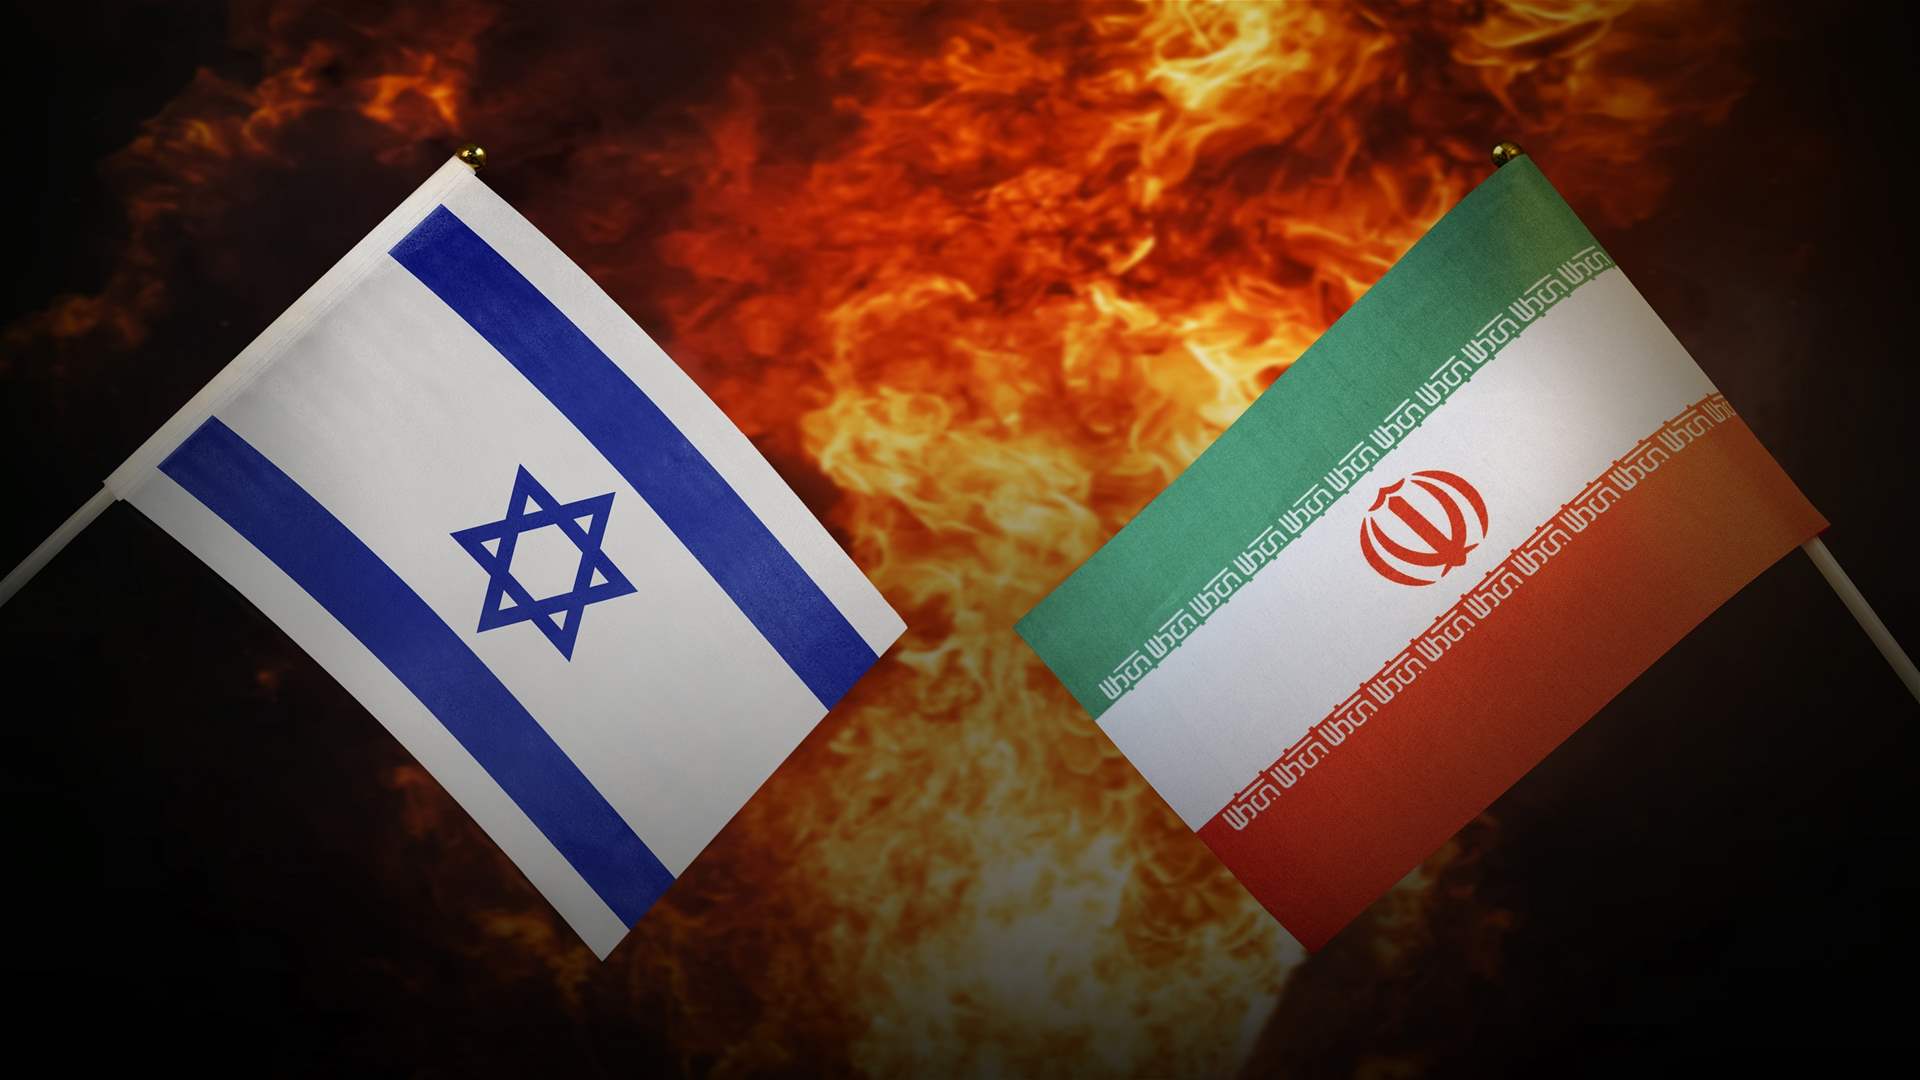 Iran aims to contain fallout in Israel response, &#39;will not be hasty&#39;